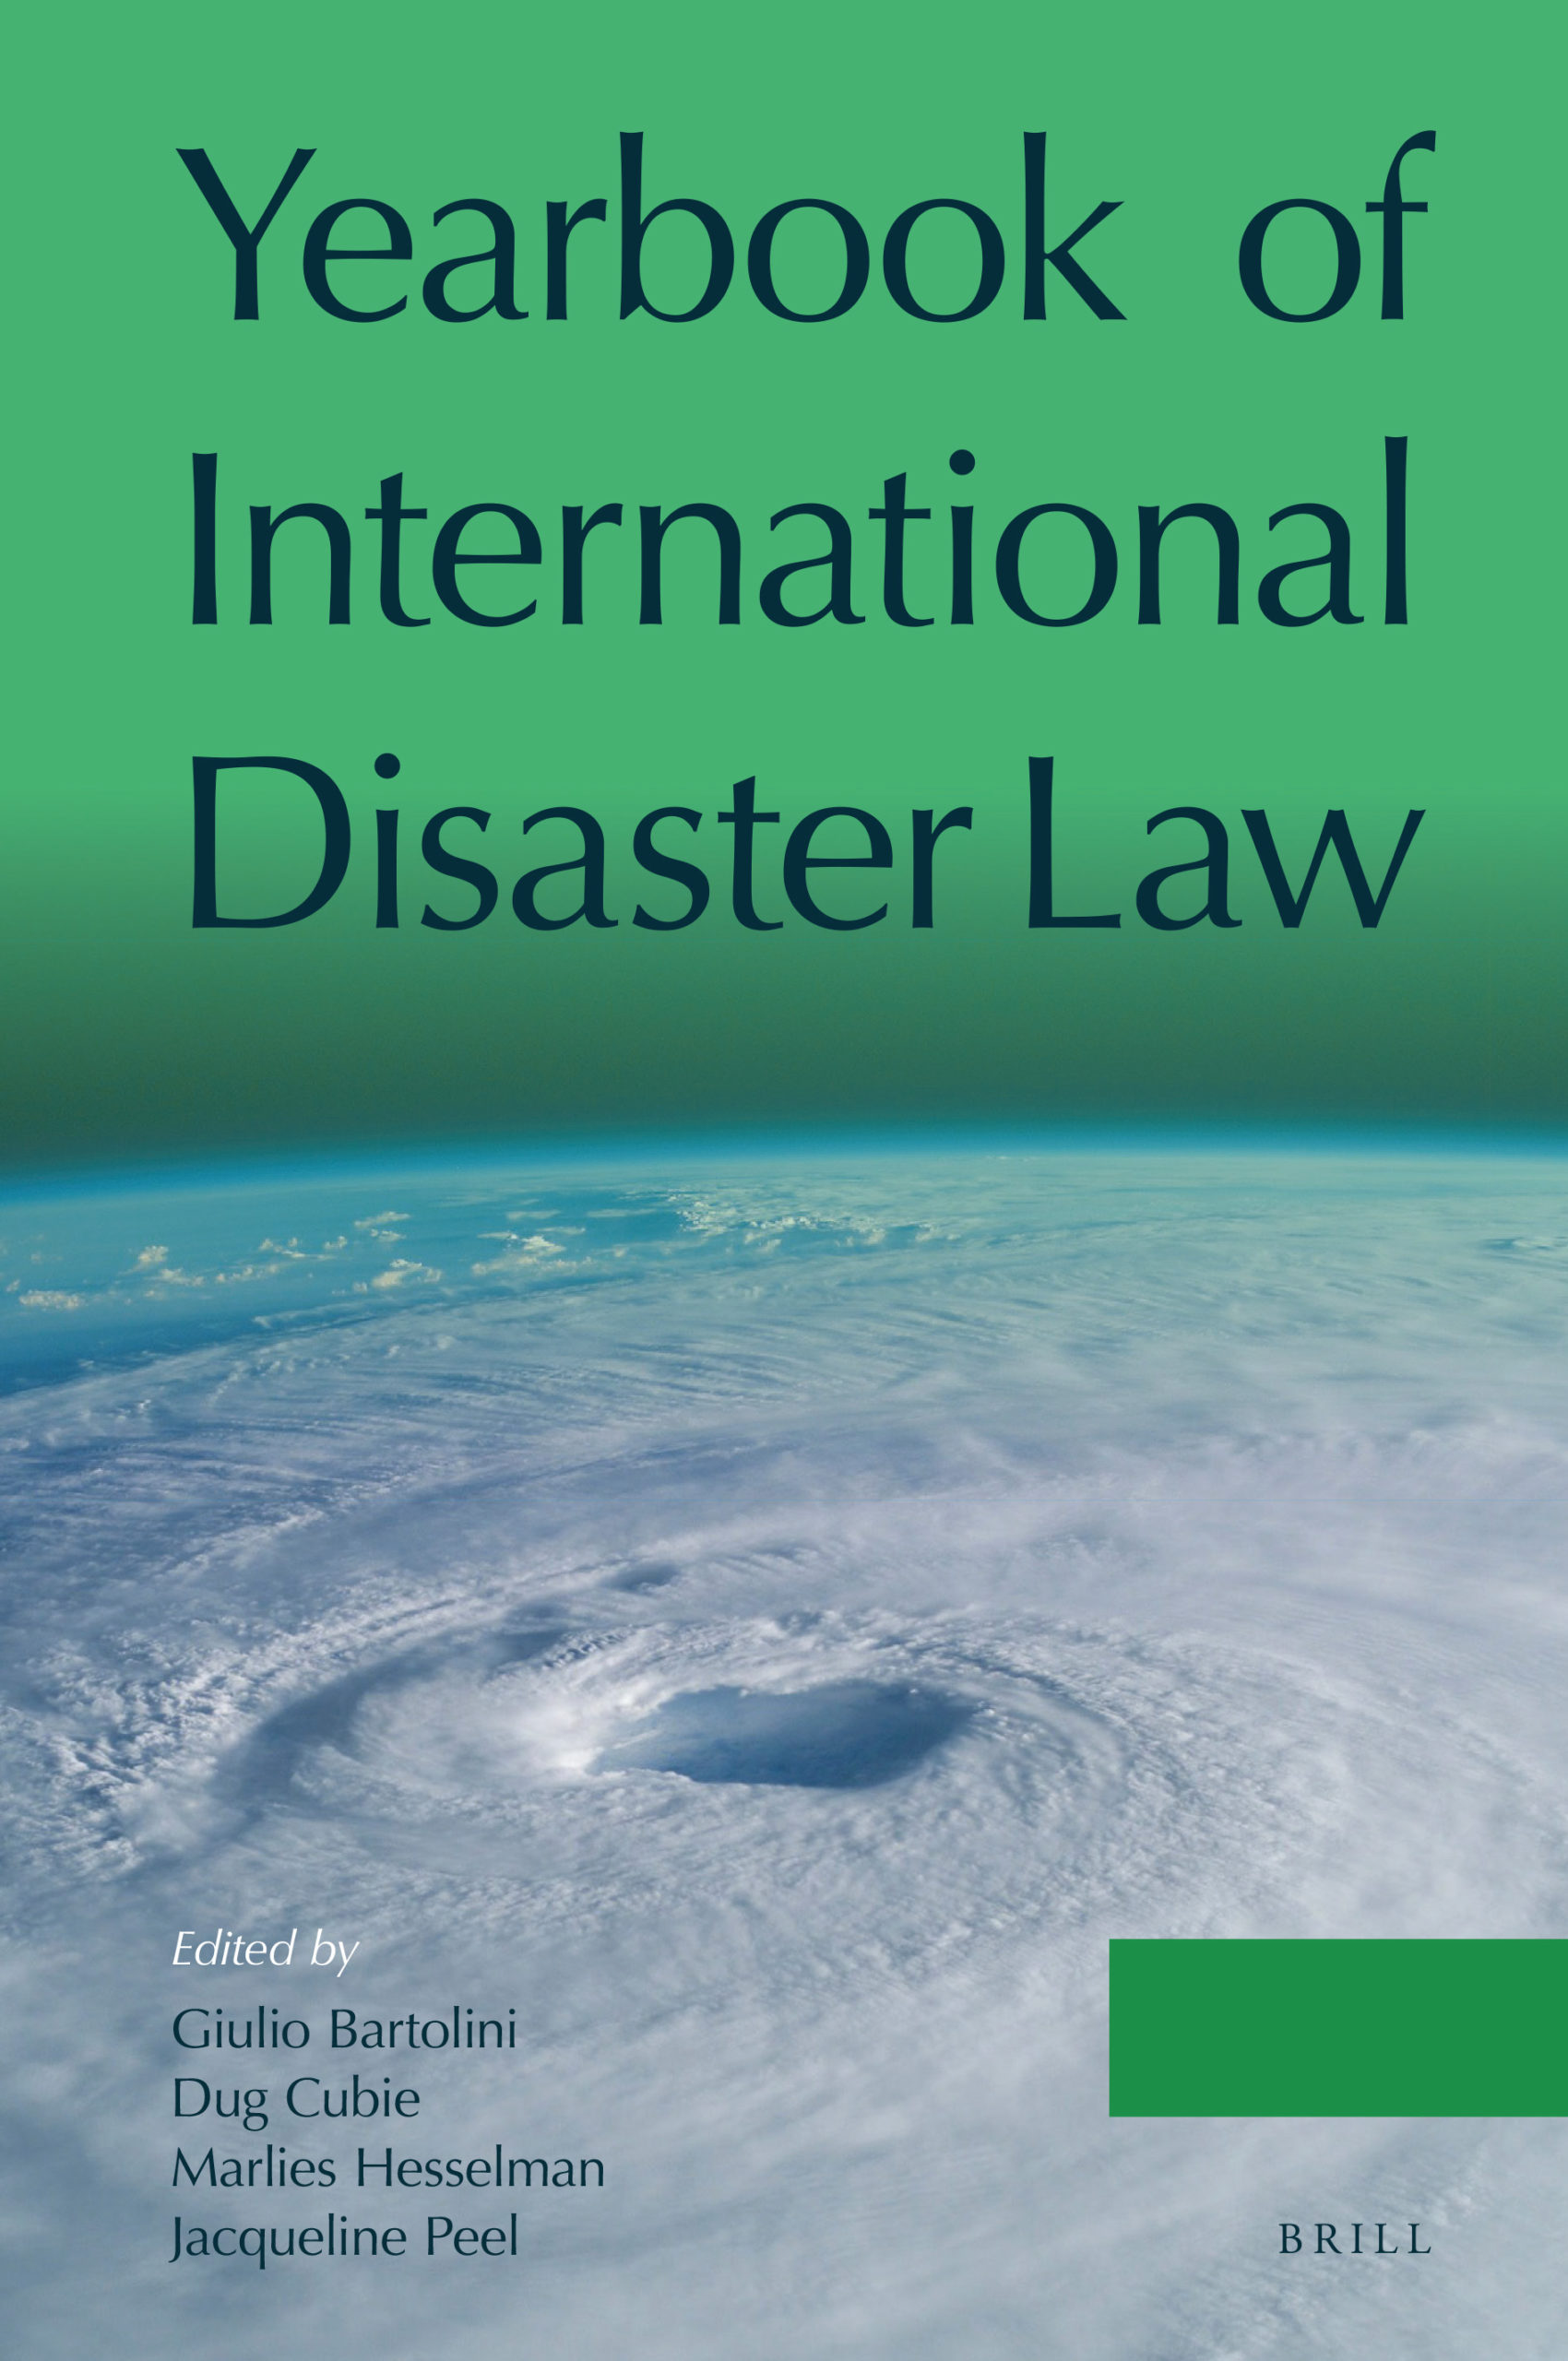 Call for Abstracts: Yearbook of International Disaster Law (Brill) Vol. No. 3 (2020)